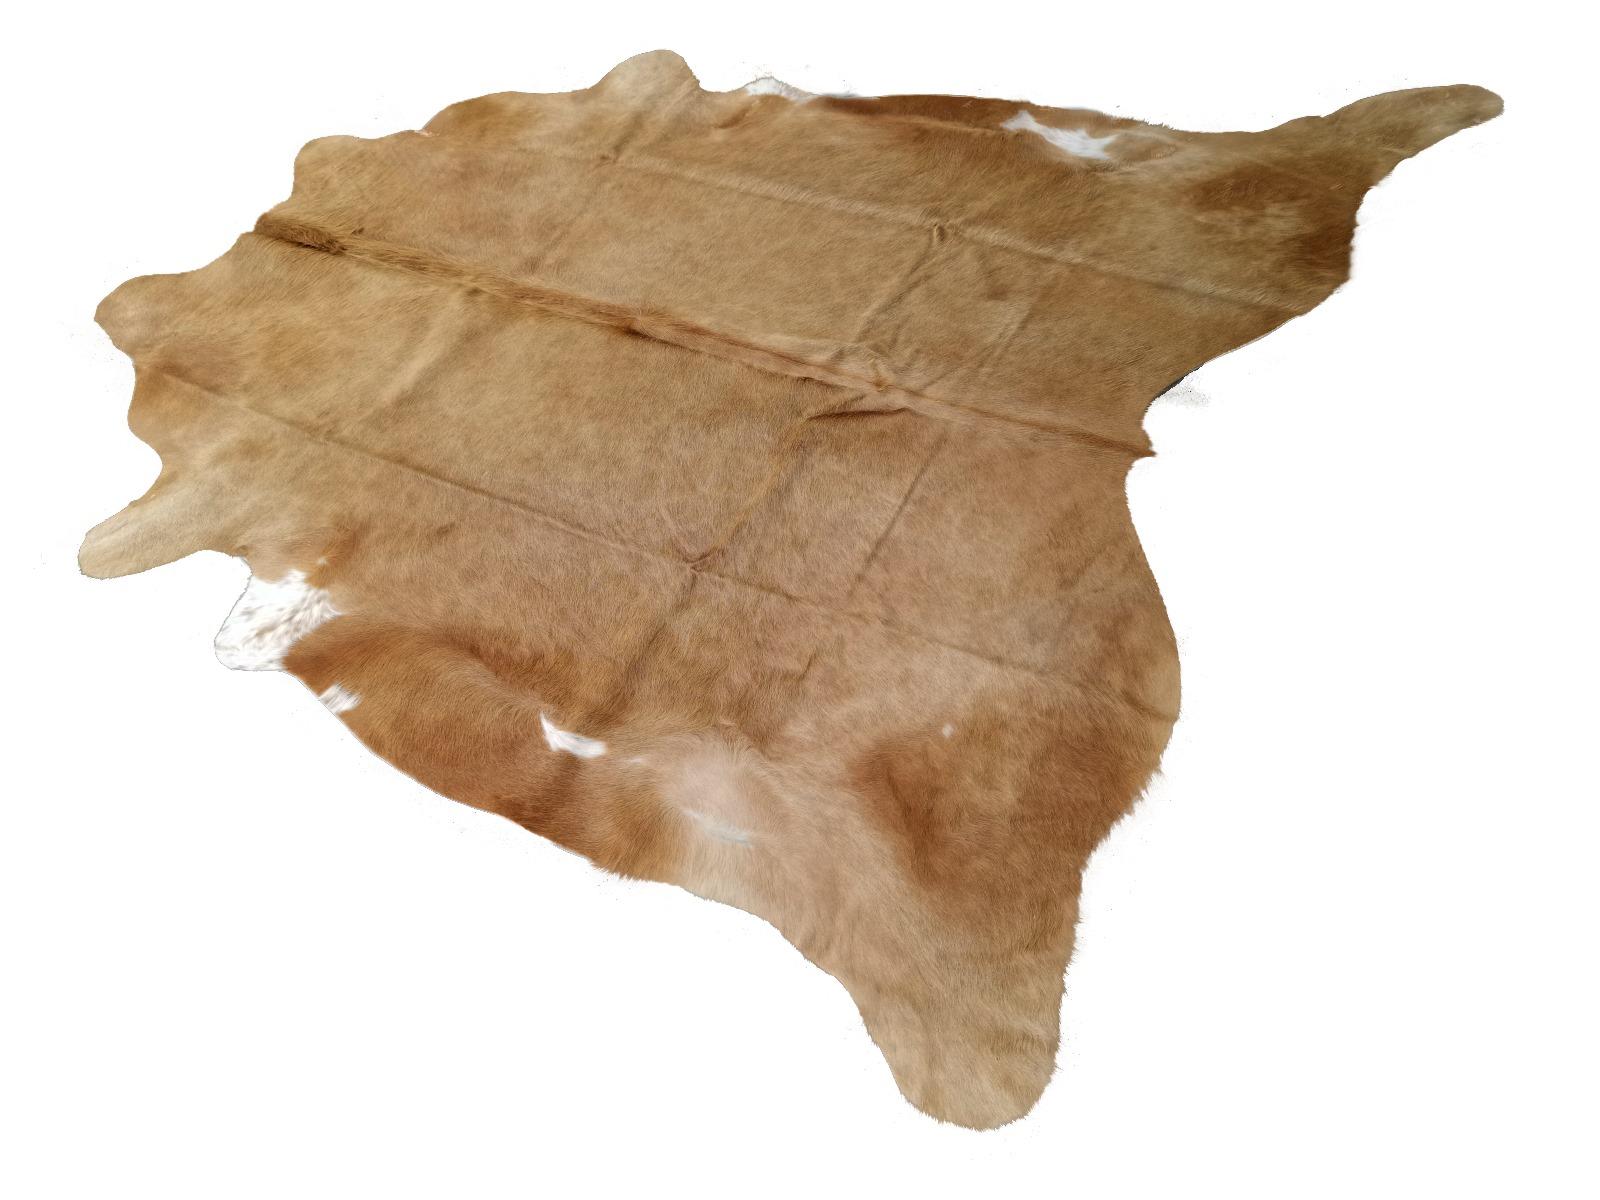 Large Cowhide rug caramel crème beige

Our premium Cowhides are of excellent quality - all hand selected. They go great with many decor styles and add a rustic look. All our Cowhide rugs are photographed separately and you will get exactly the